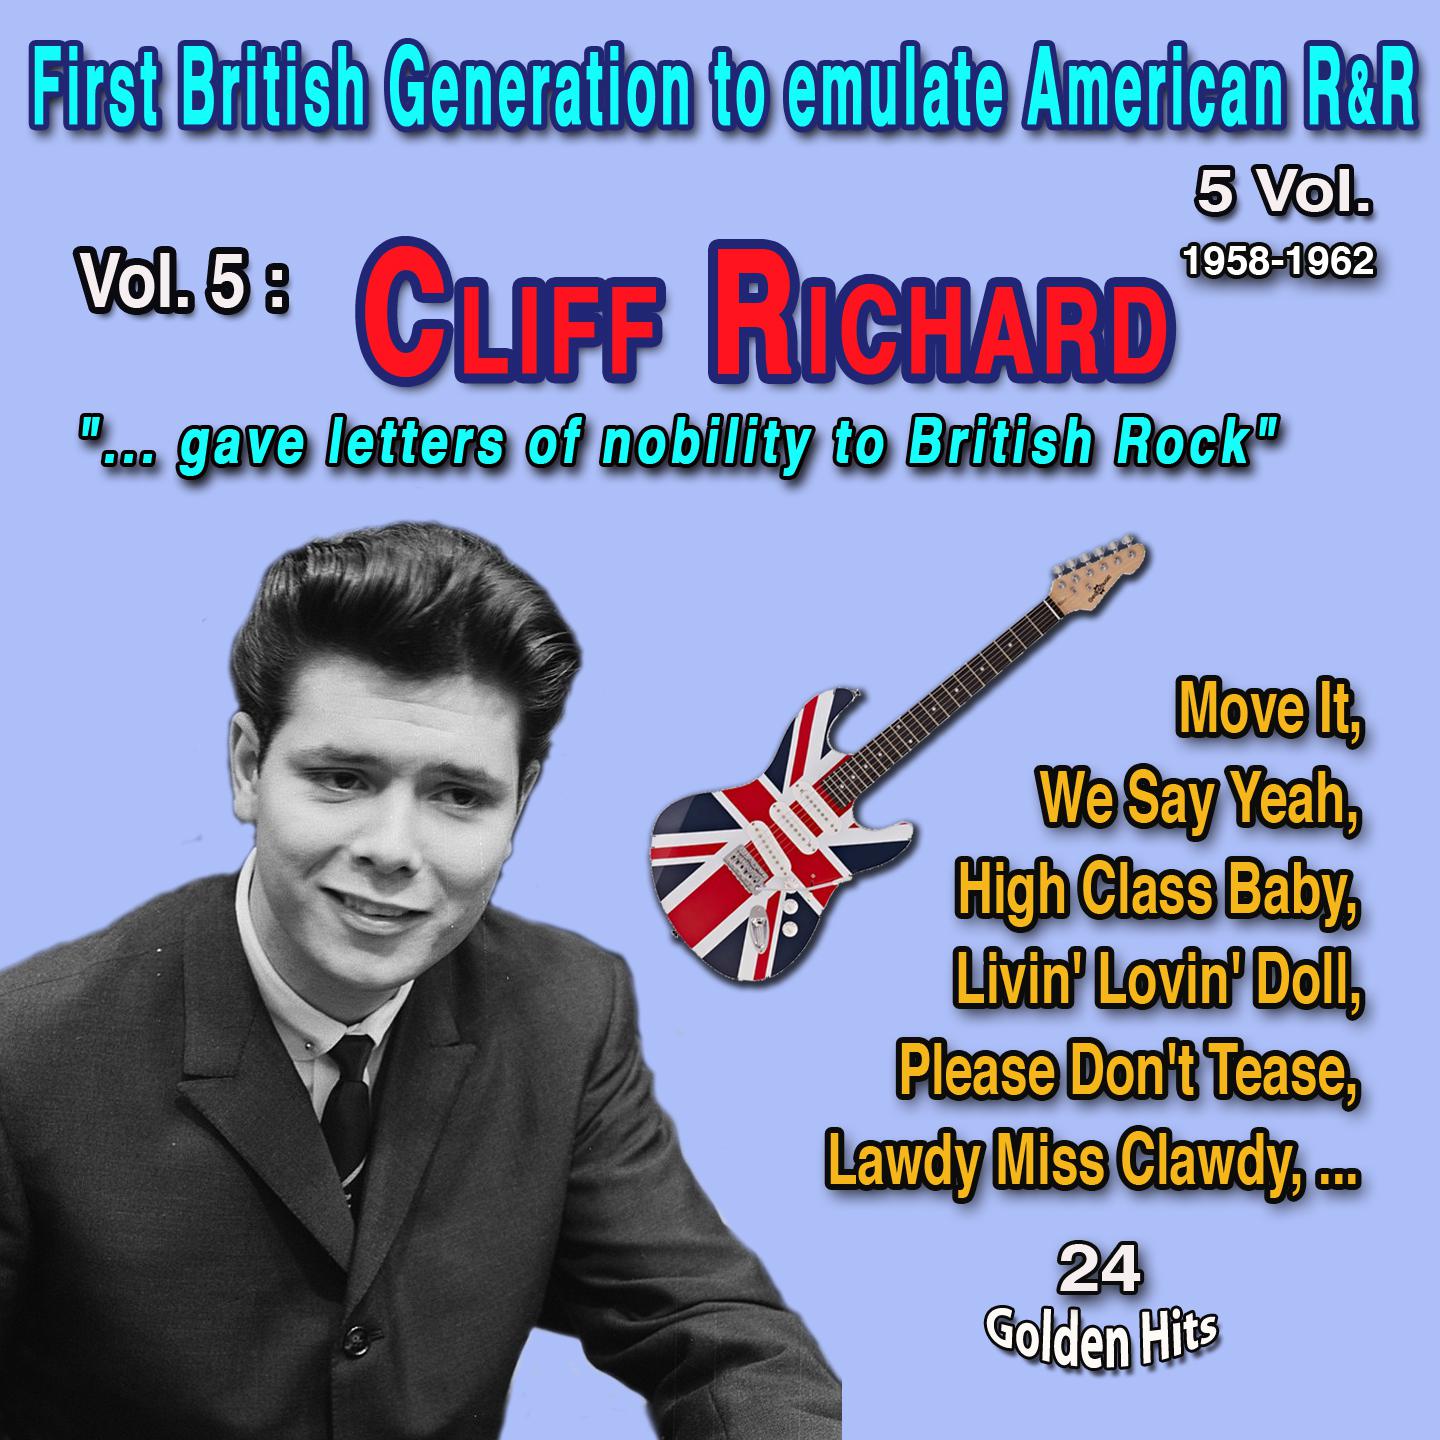 Постер альбома First British Generatio to emulate American Rock and Roll 5 Vol. - 1958-1962 Vol. 5 : Cliff Richard "The Peter Pan of Rock and Pop"